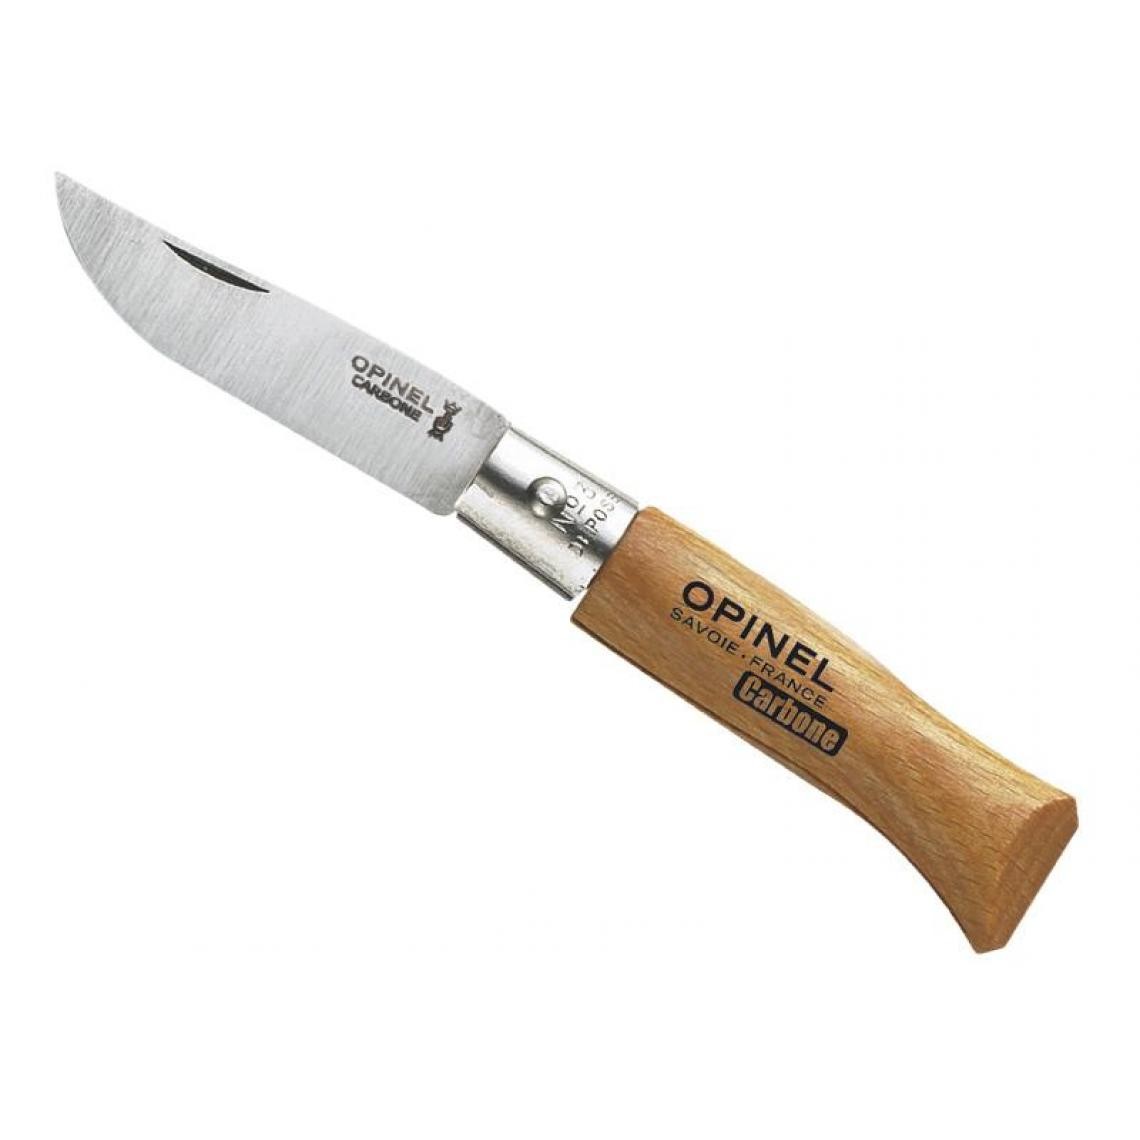 Opinel - OPINEL - 940.03 - BOITE 12 OPINEL N.3 CARBONE - Outils de coupe